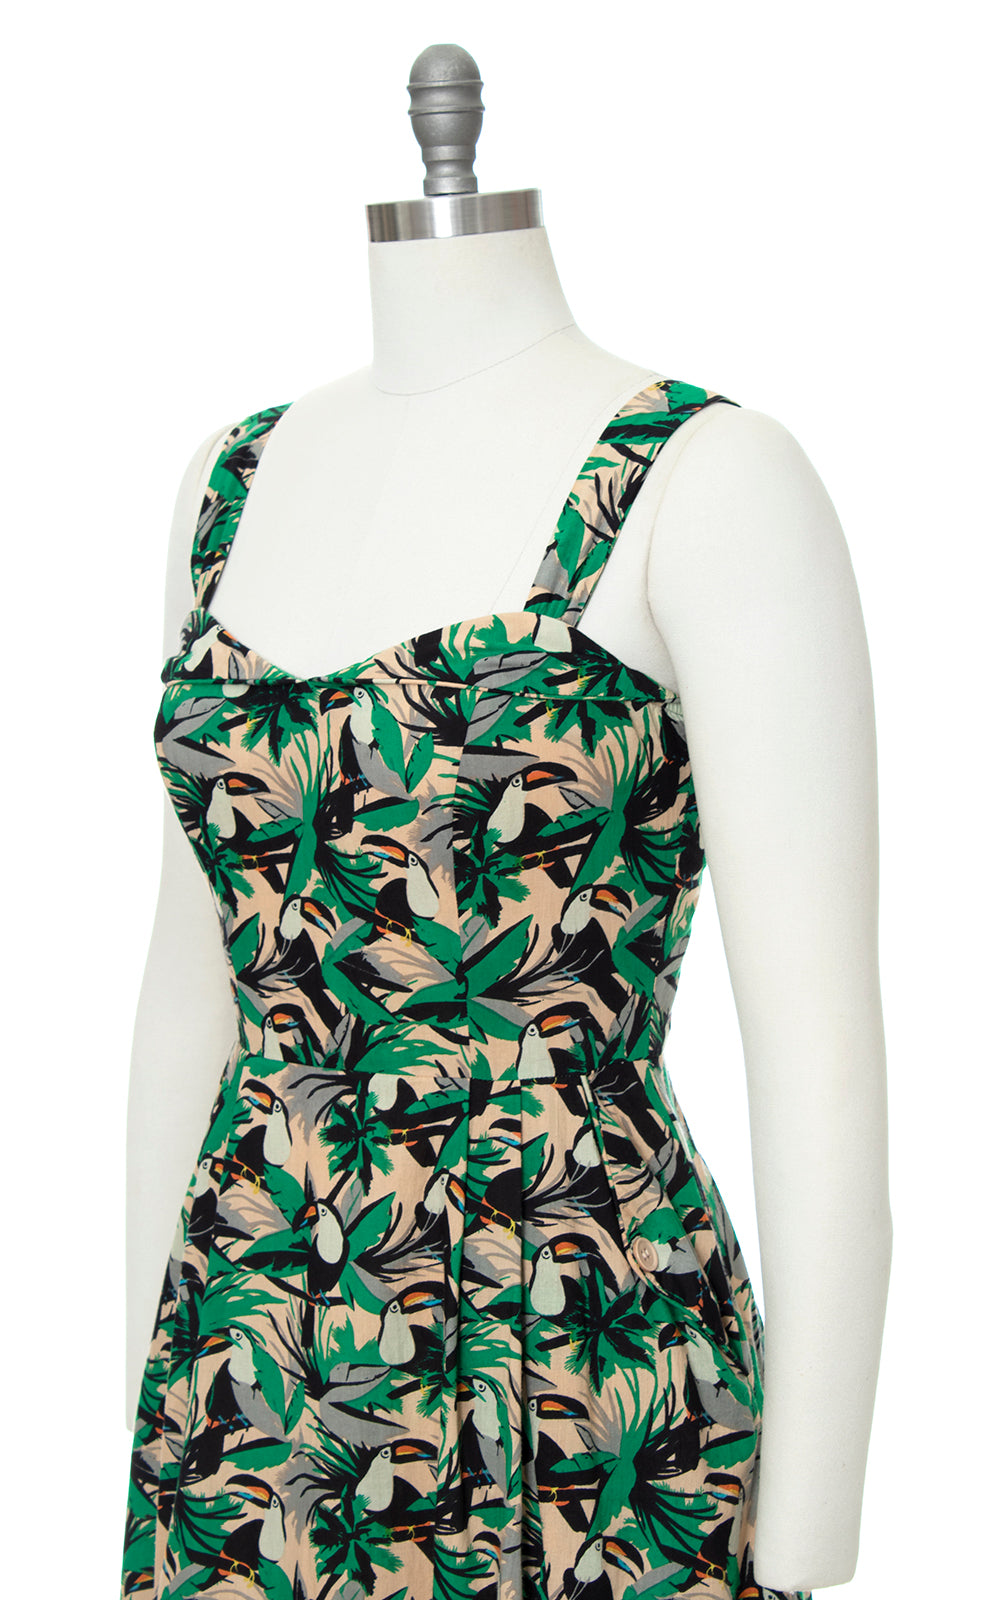 Modern 1950s Style EMILY AND FIN Toucan Novelty Print Sundress with Pockets | small